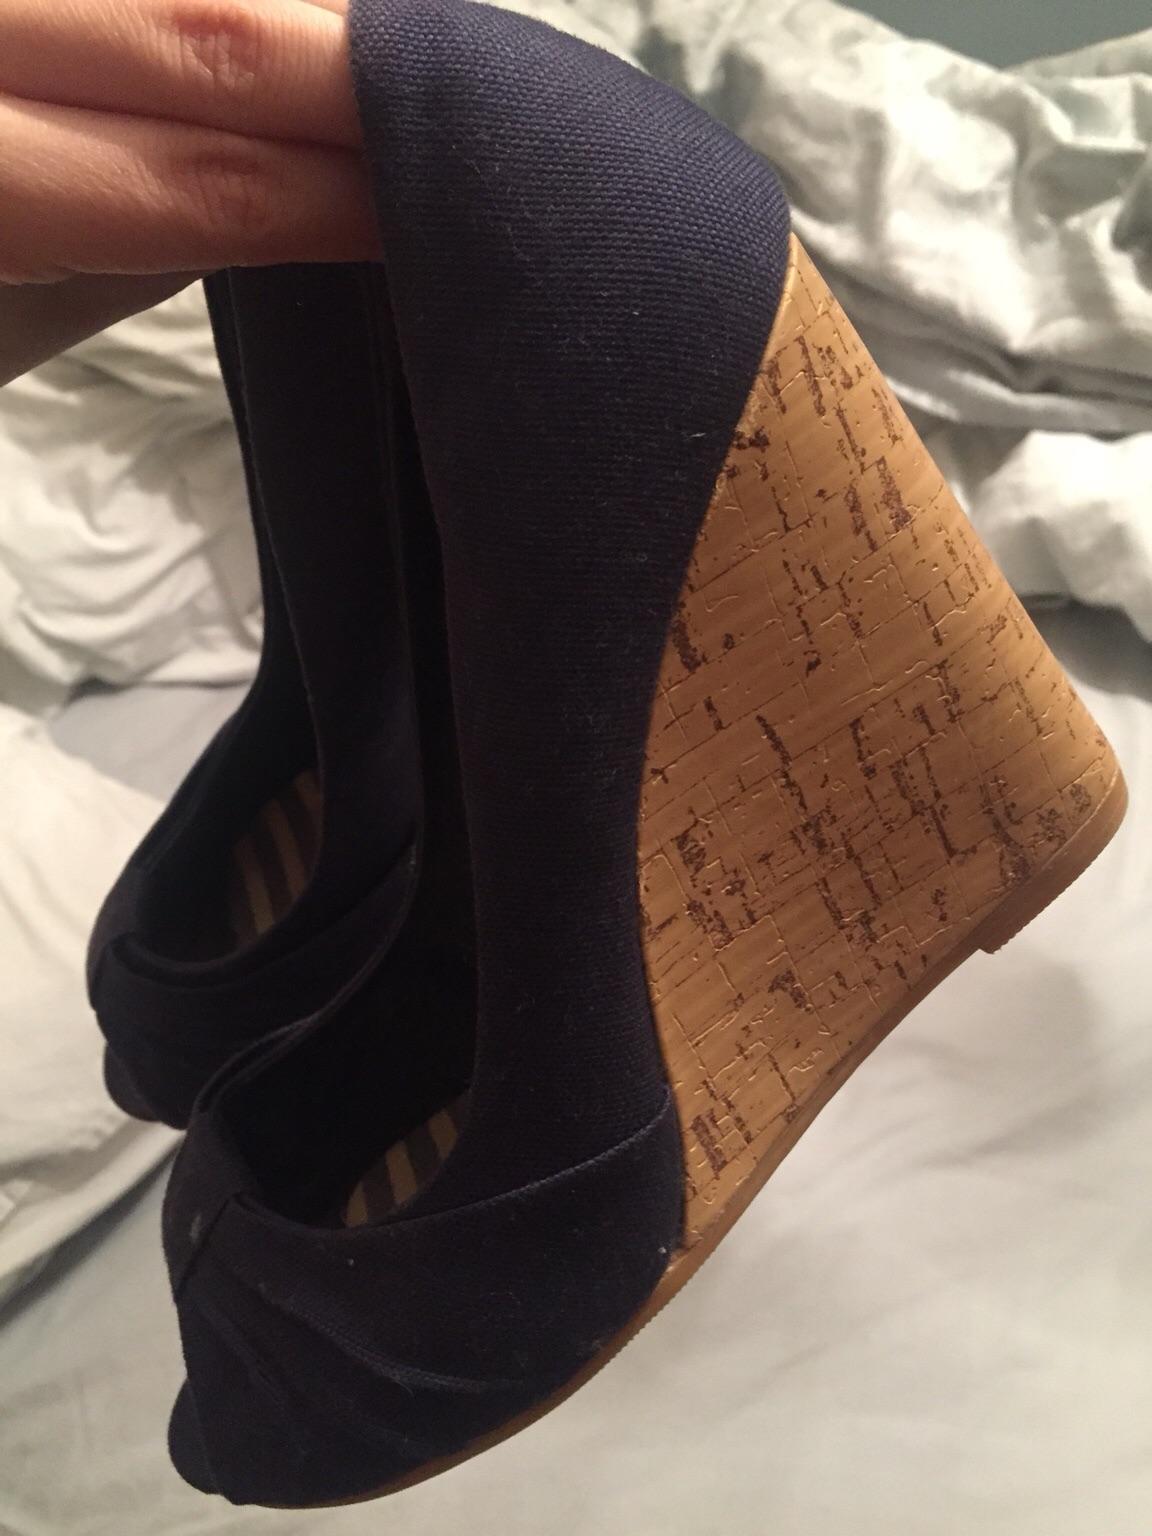 Matalan Navy wedge shoes - size 5 in KT17 London for £3.00 for sale ...